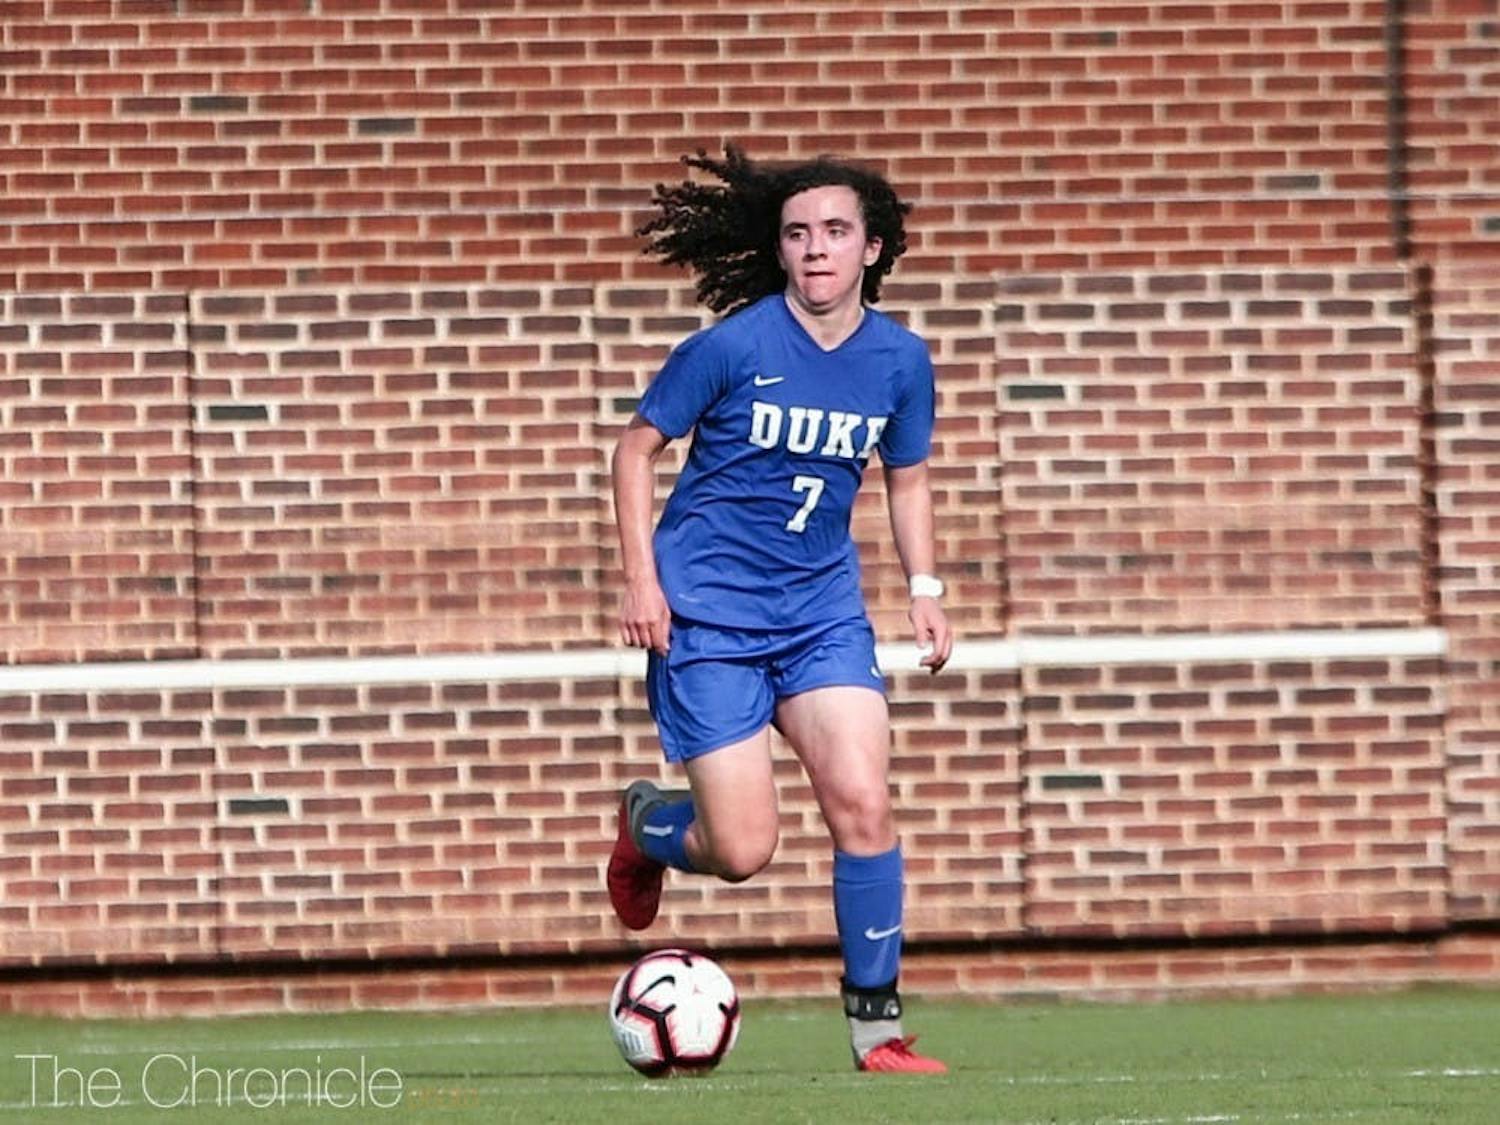 Sophomore midfielder Sophie Jones has been lauded as one of the top 10 players in the country.